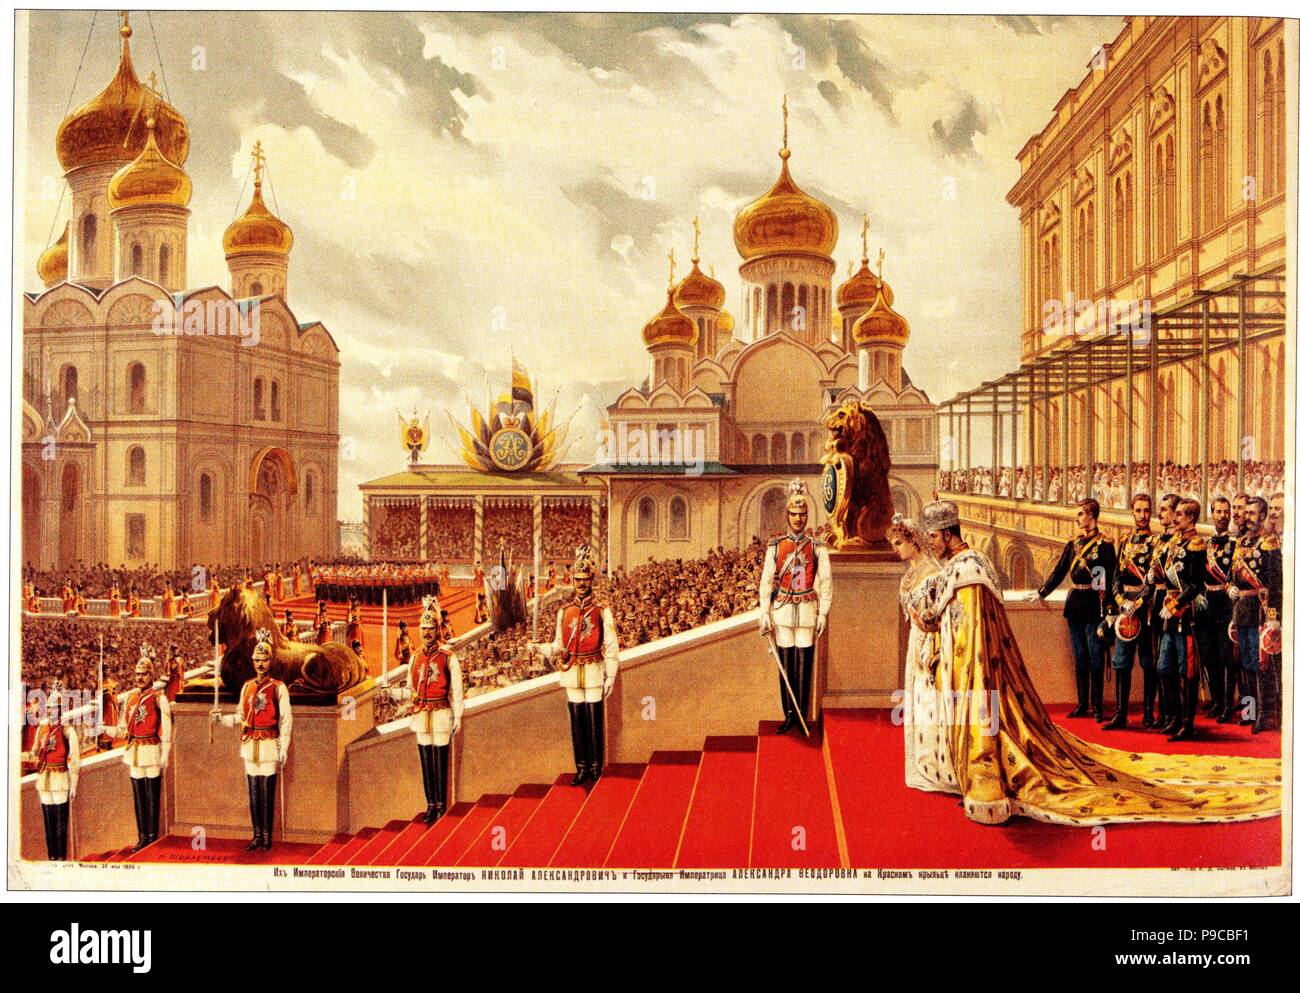 The Coronation Ceremony of Nicholas II. On the Red Porch. Museum: State History Museum, Moscow. Stock Photo